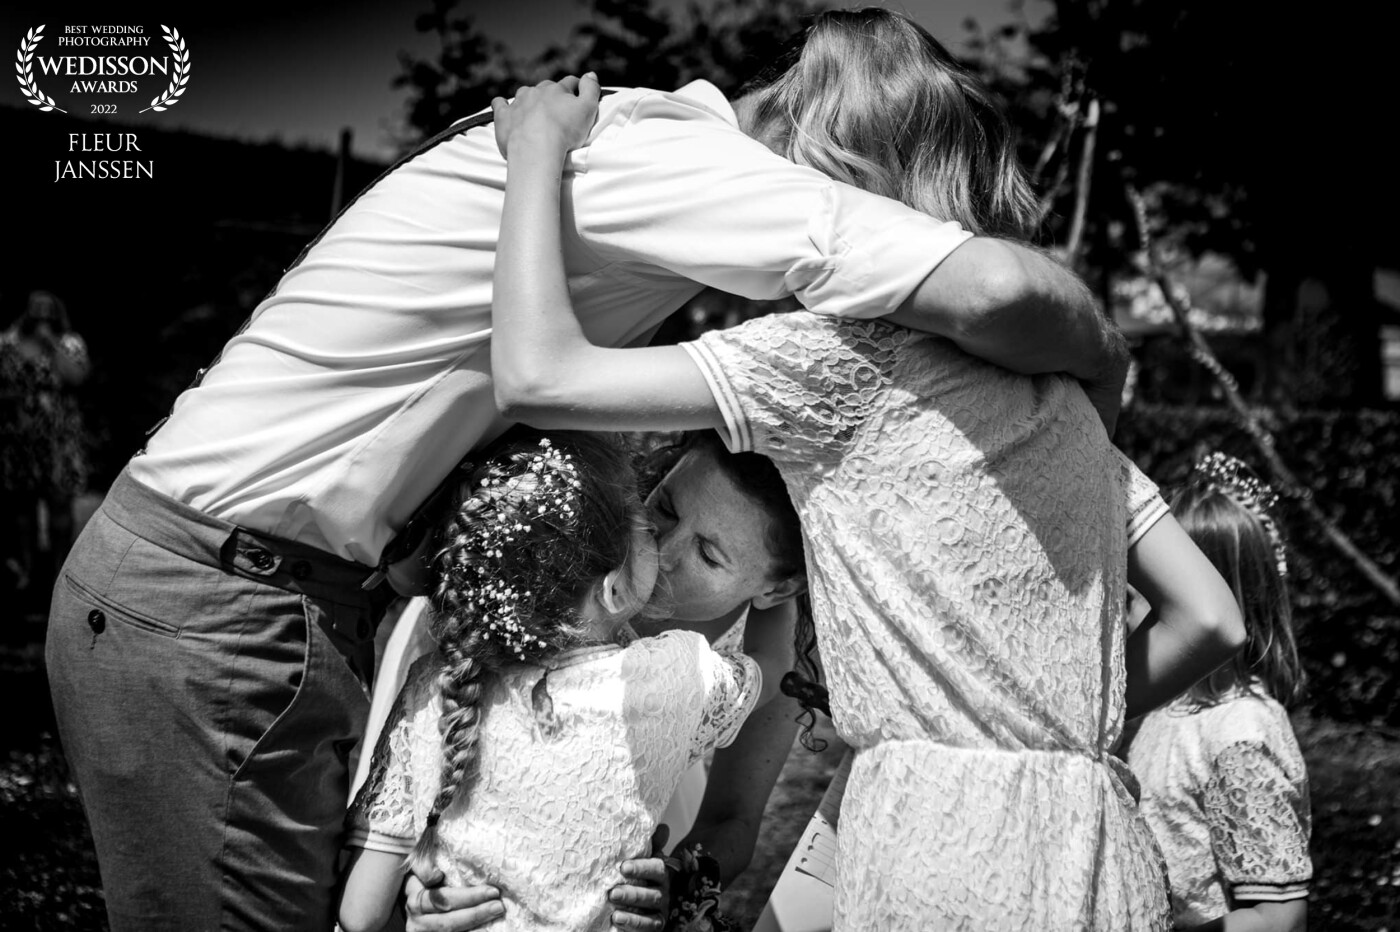 What a great wedding. Great weather, great people, great venue. After the kids did their speech this loving moment came! I melted and was glad to capture this moment.